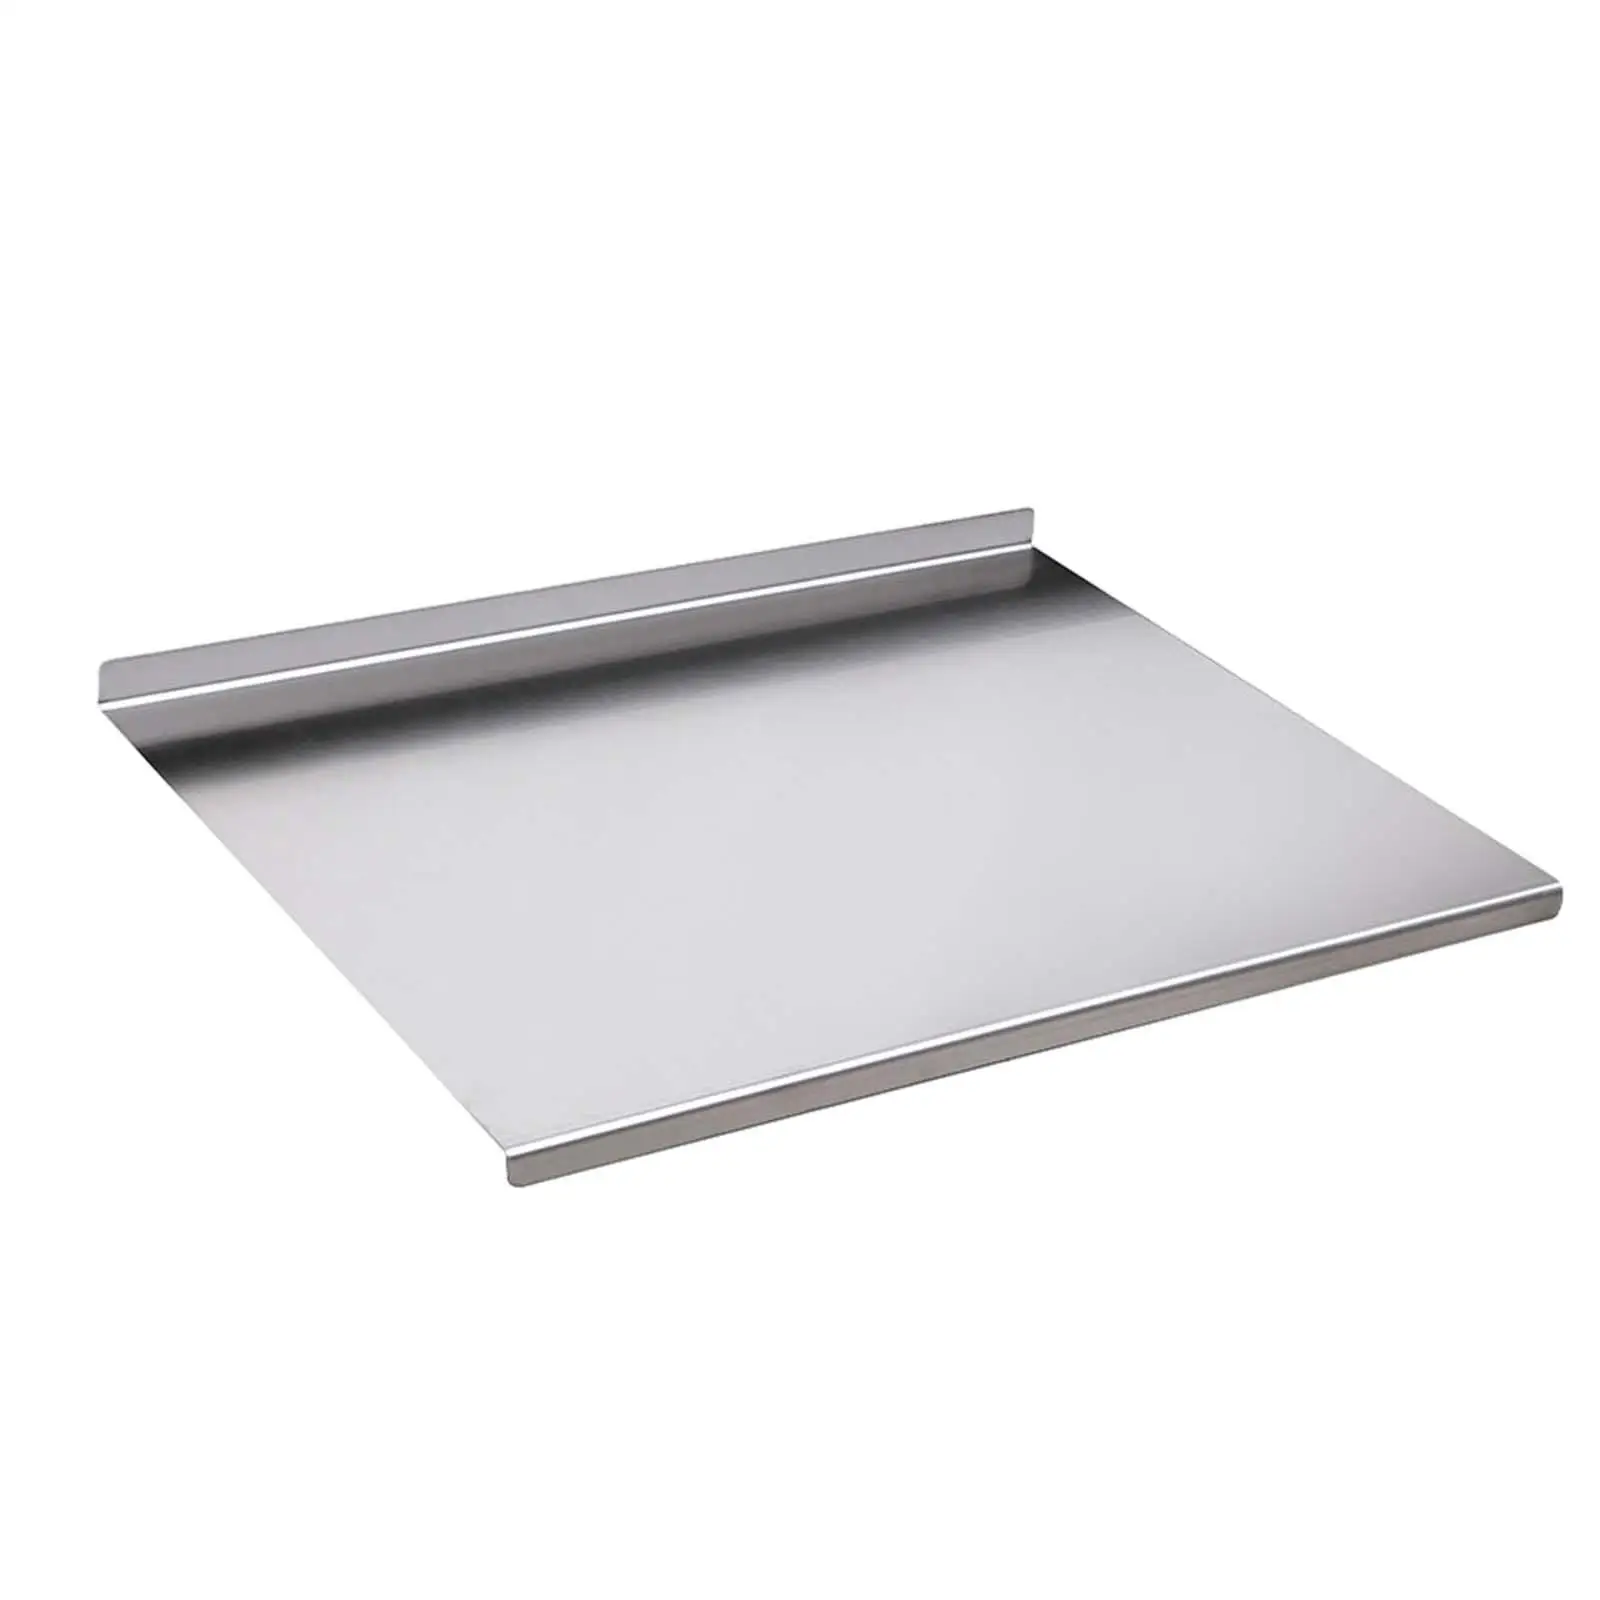 Stainless Steel Chopping Board Pizza Biscuits Board Baking Board Nonstick